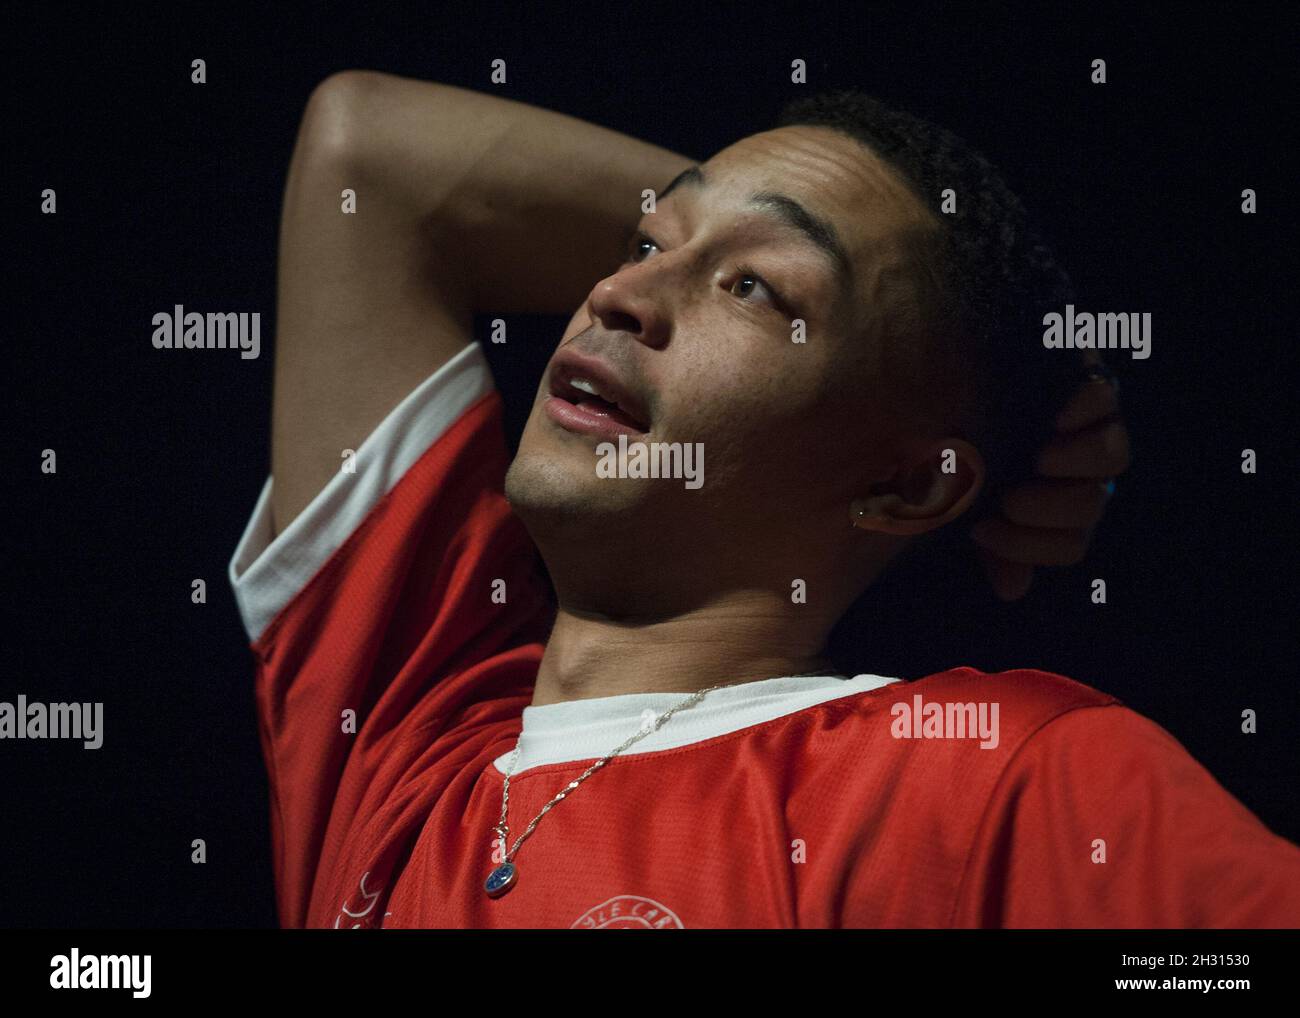 Loyle Carner performs live on stage at the O2 Shepherd's Bush Empire, Shepherd's Bush, London. Picture date: Friday 17th February 2017. Photo credit should read: DavidJensen/EMPICS Entertianment. Stock Photo